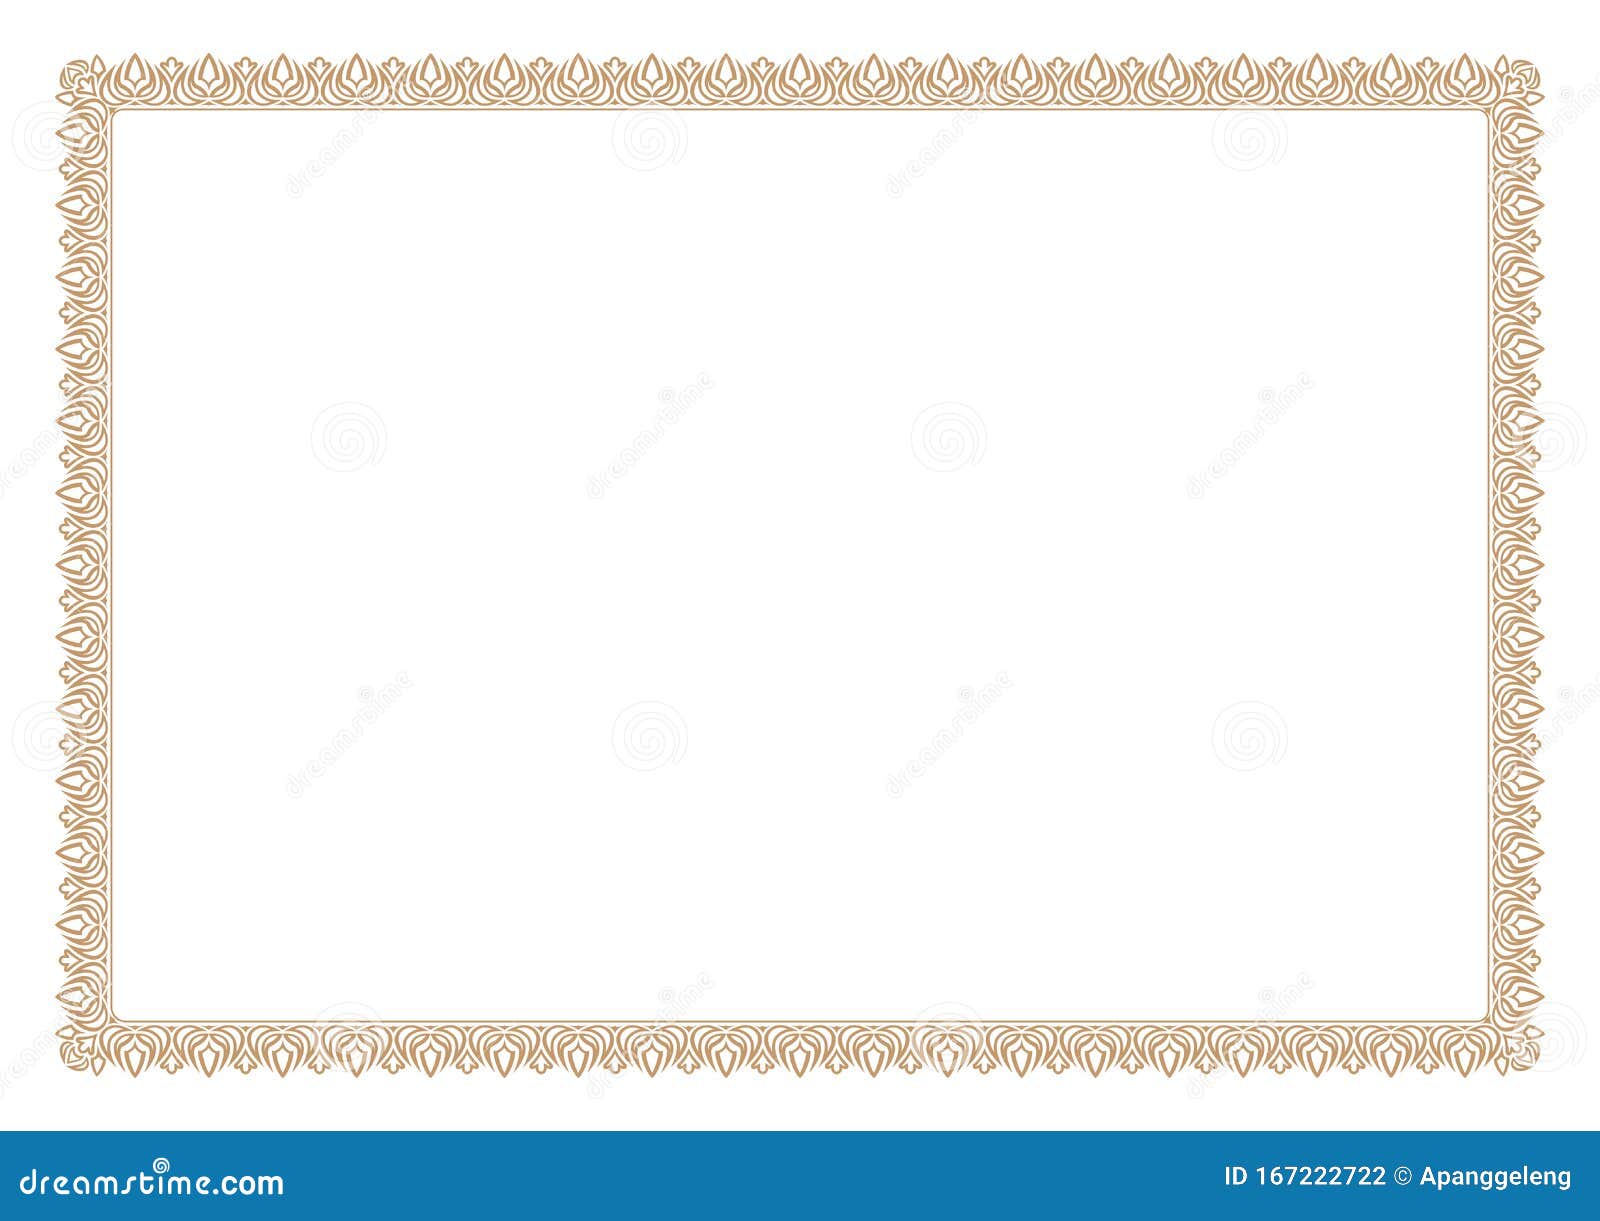 Download Blank Certificate Border, Ready Add Text, In Gold Color ...